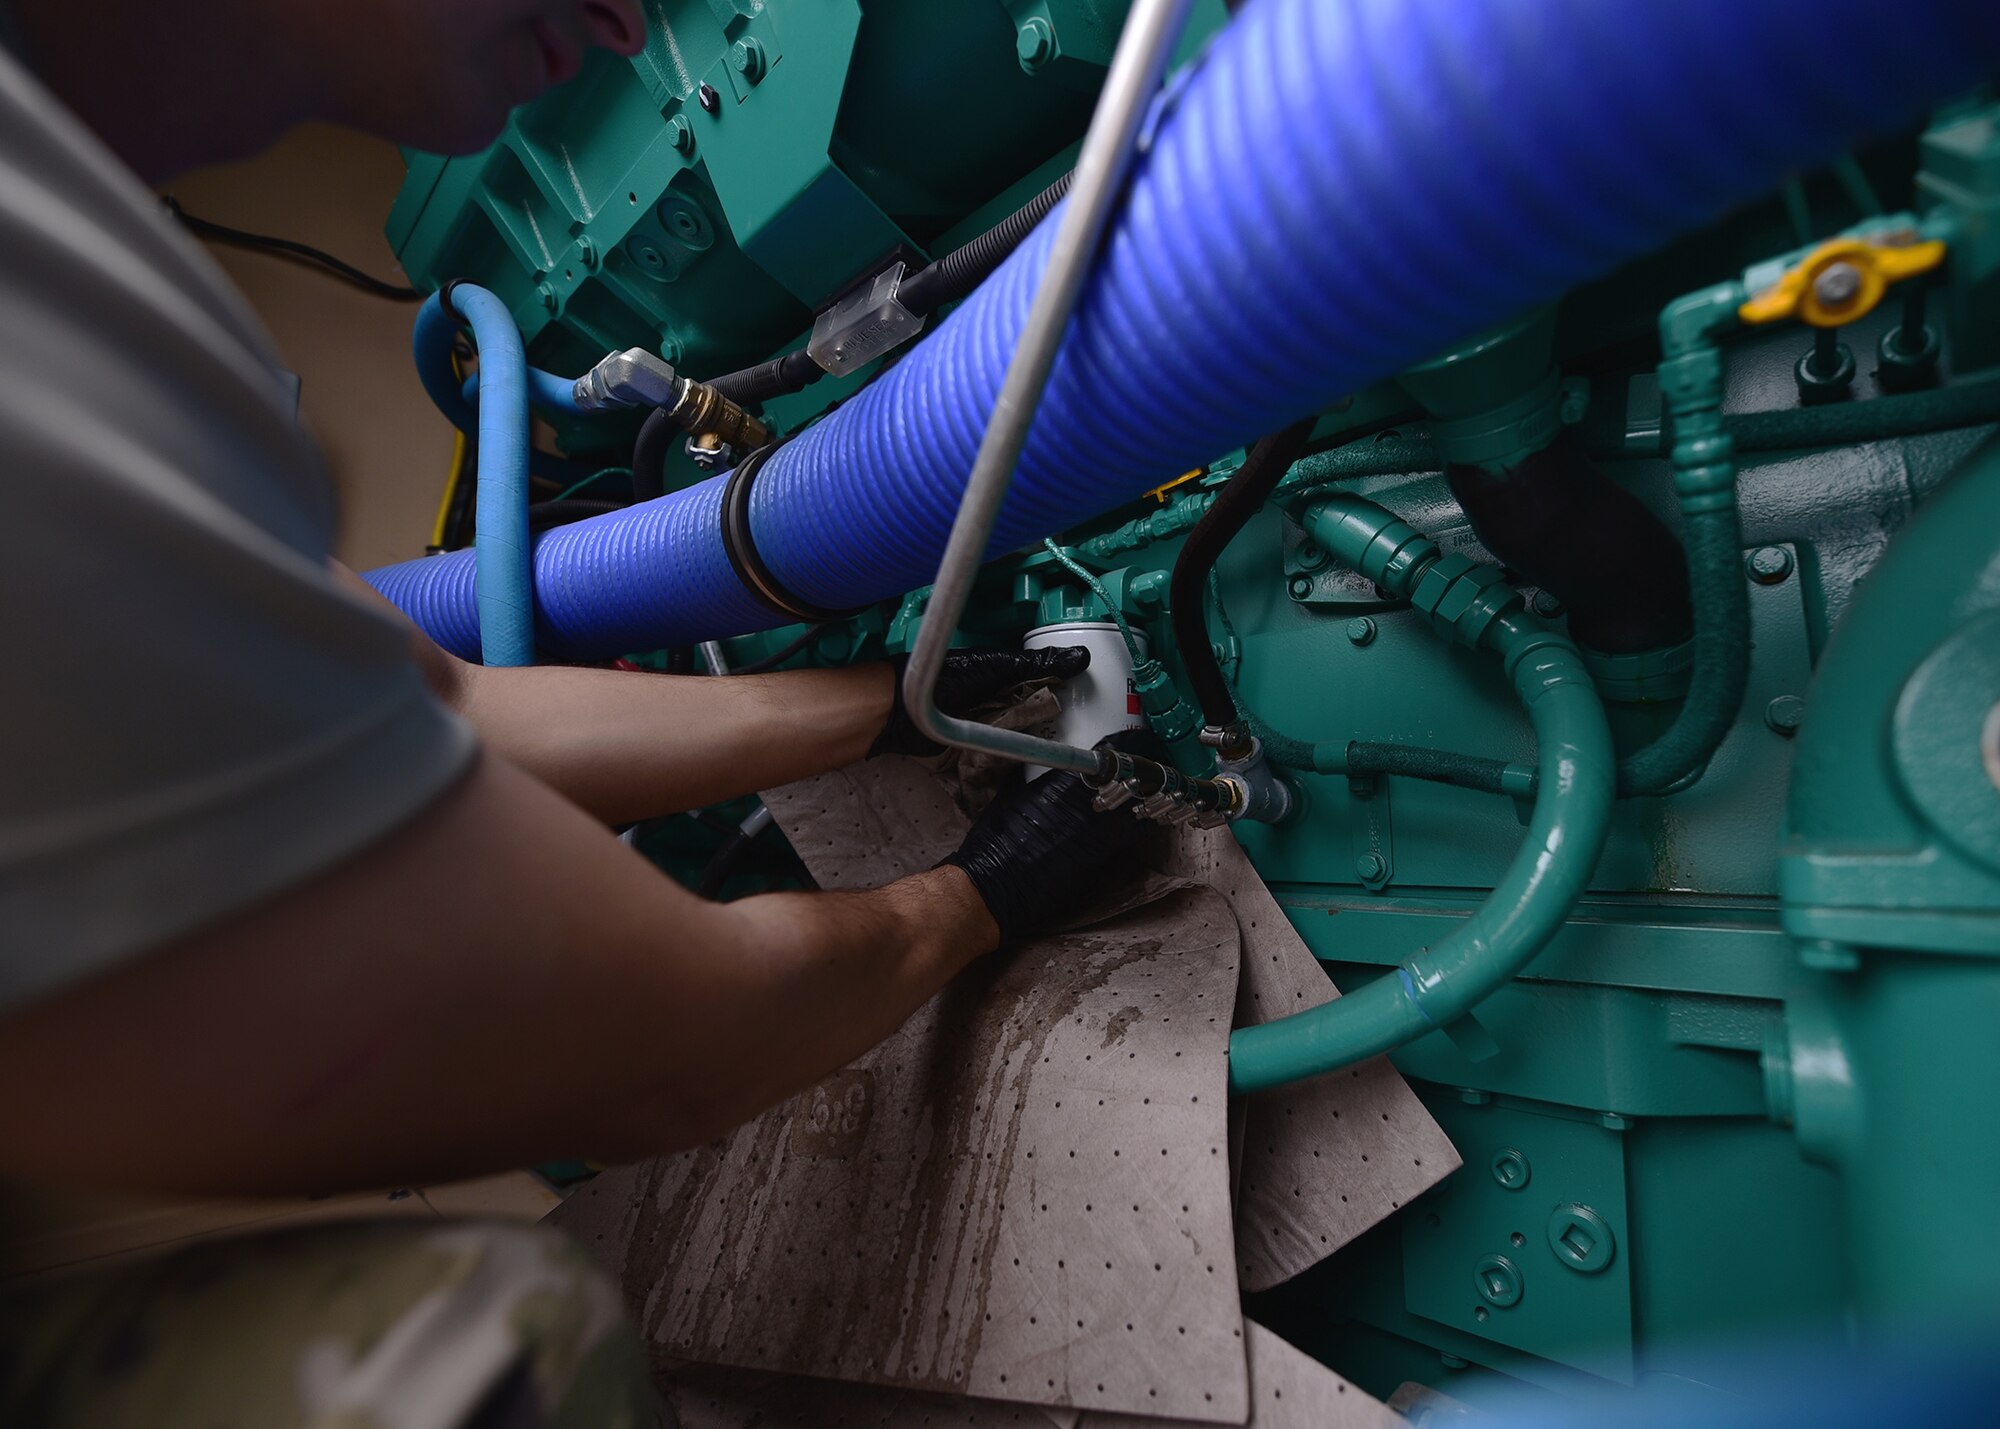 Staff Sgt. Joshua R. Olando, an electrical power production craftsman supporting the 325th Civil Engineer Squadron, installs new filters on a BPU 800 kilowatt high-voltage generator Nov. 30, 2018, at Tyndall Air Force Base, Fla. In the wake of Hurricane Michael, support and supplies from around the country poured in to assist Tyndall in recovery efforts. Olando is currently deployed from the 436th Civil Engineer Squadron at Dover Air Force Base, Del. (U.S. Air Force photo by Senior Airman Isaiah J. Soliz)